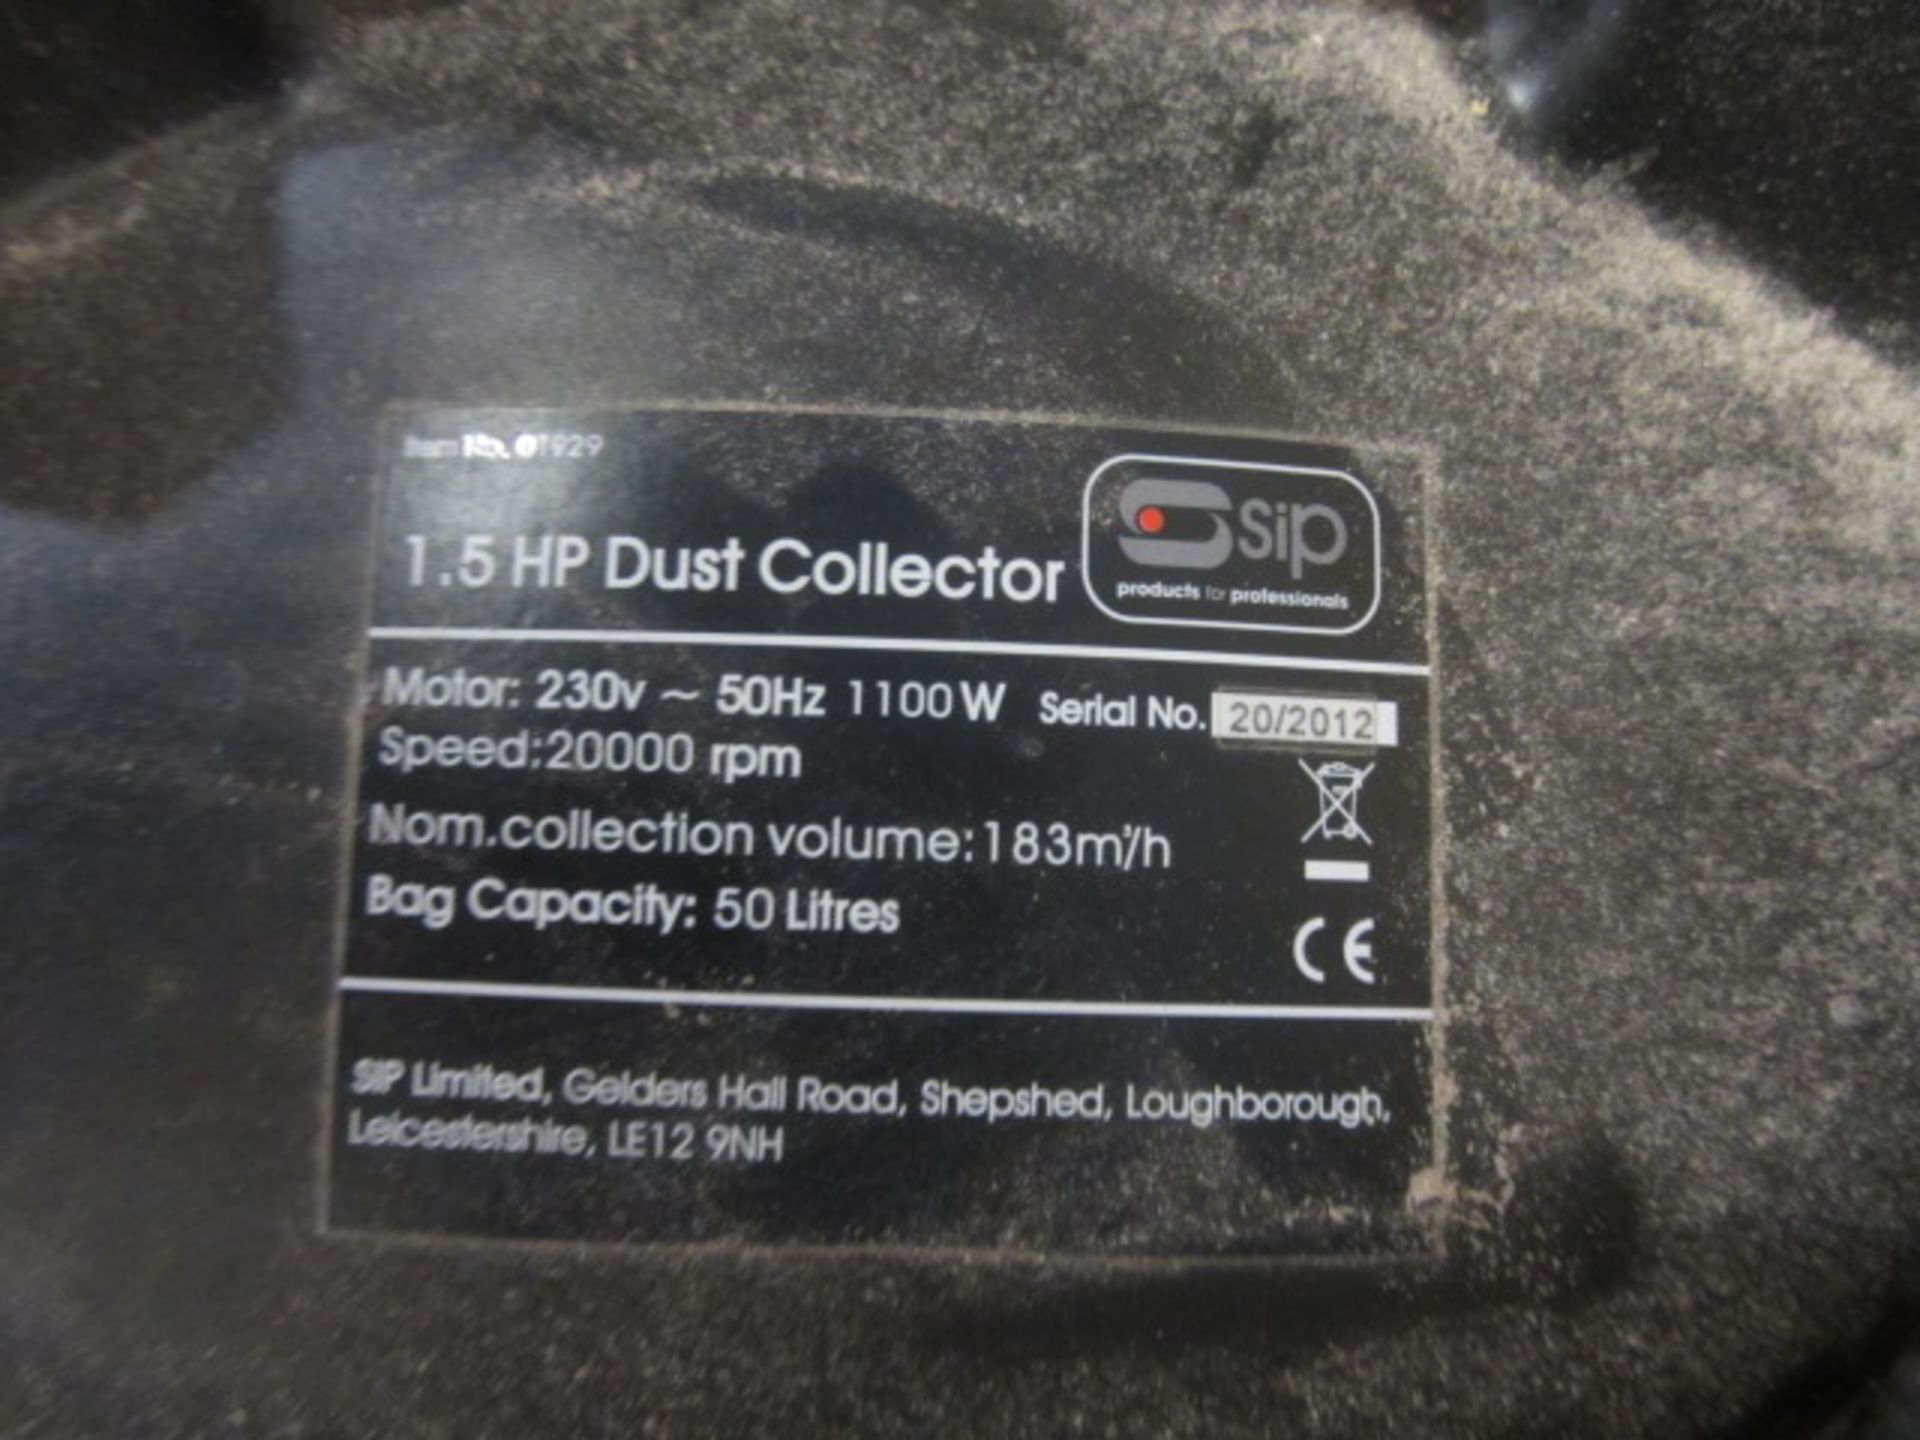 SIP portable dust extractor, 1.5HP, s/n: 20/2012, bag capacity 50 litres, 240v. Located at main - Image 2 of 2